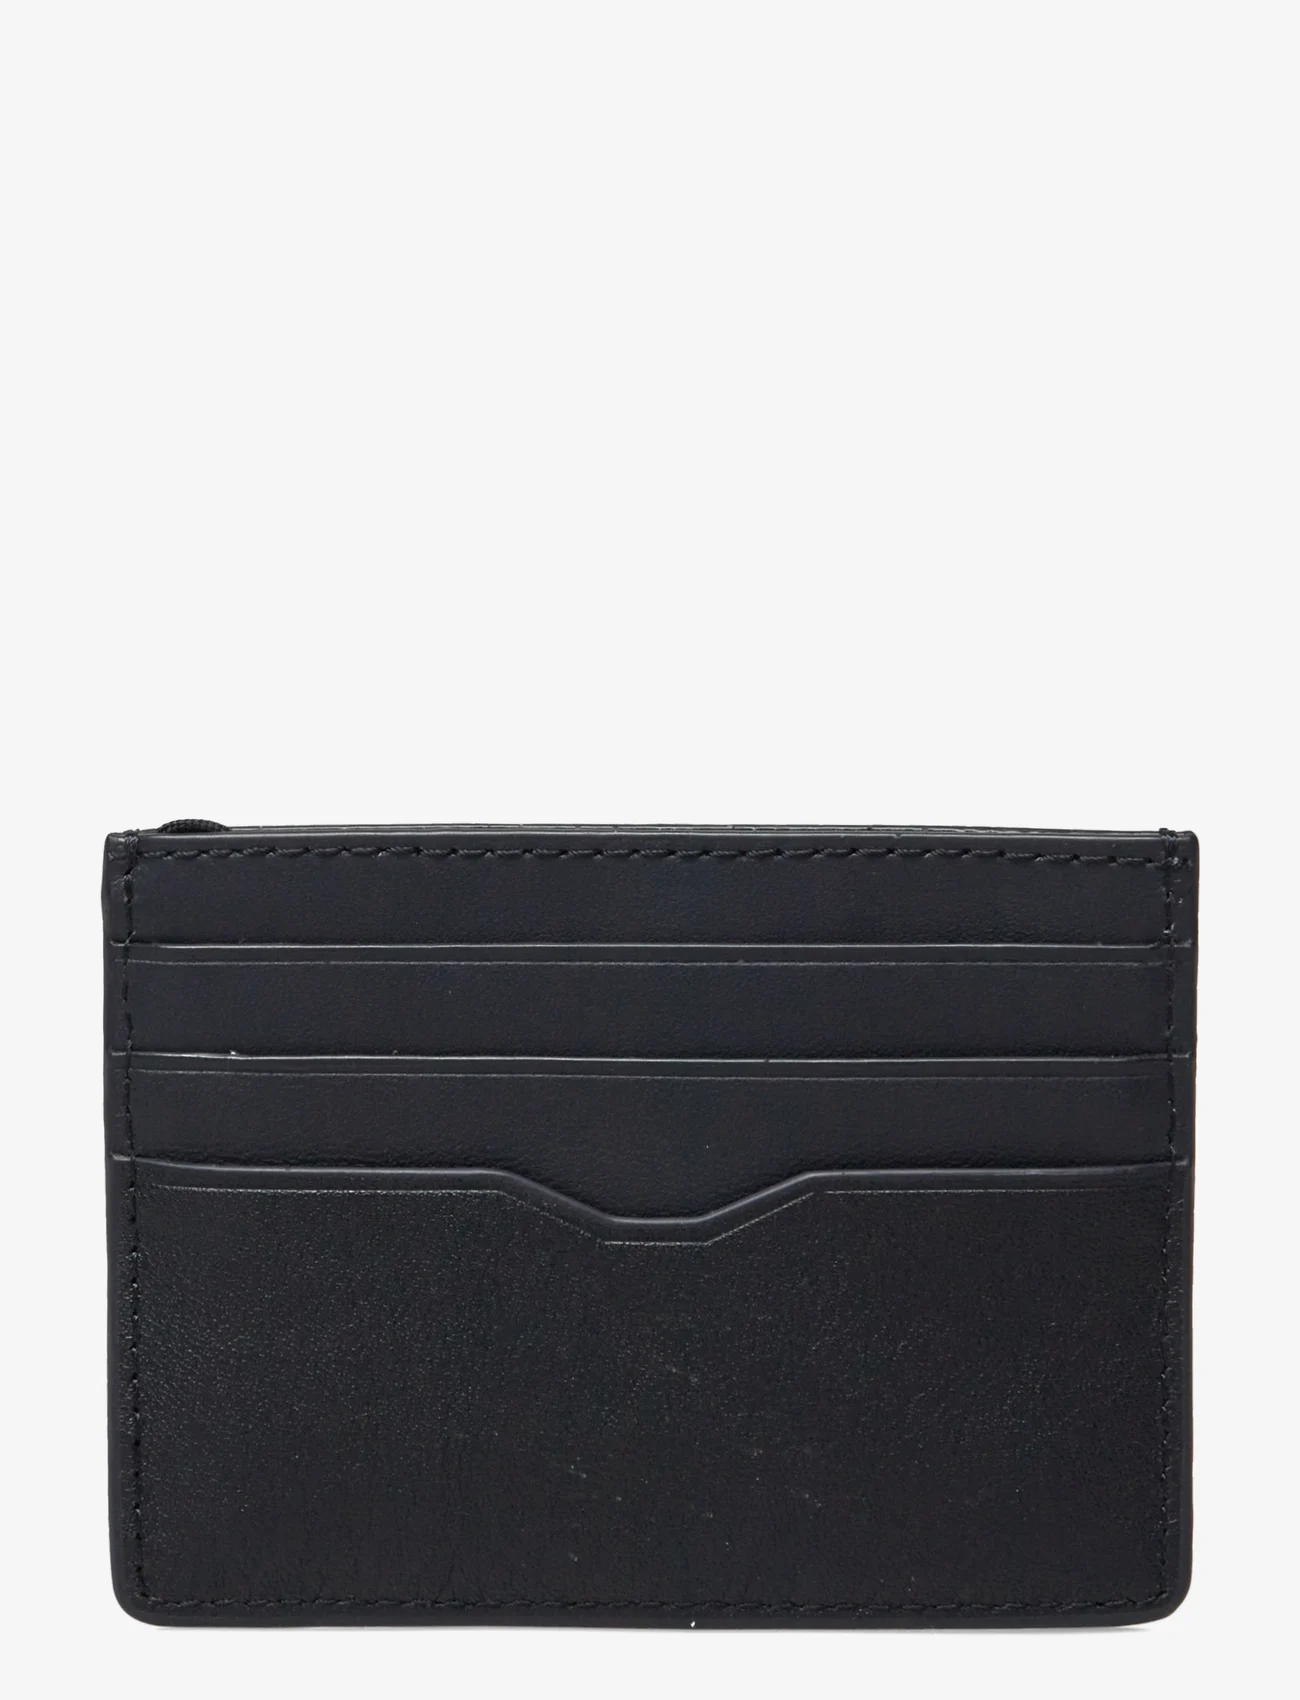 Tommy Hilfiger - TH CENTRAL CC HOLDER - space blue - 1